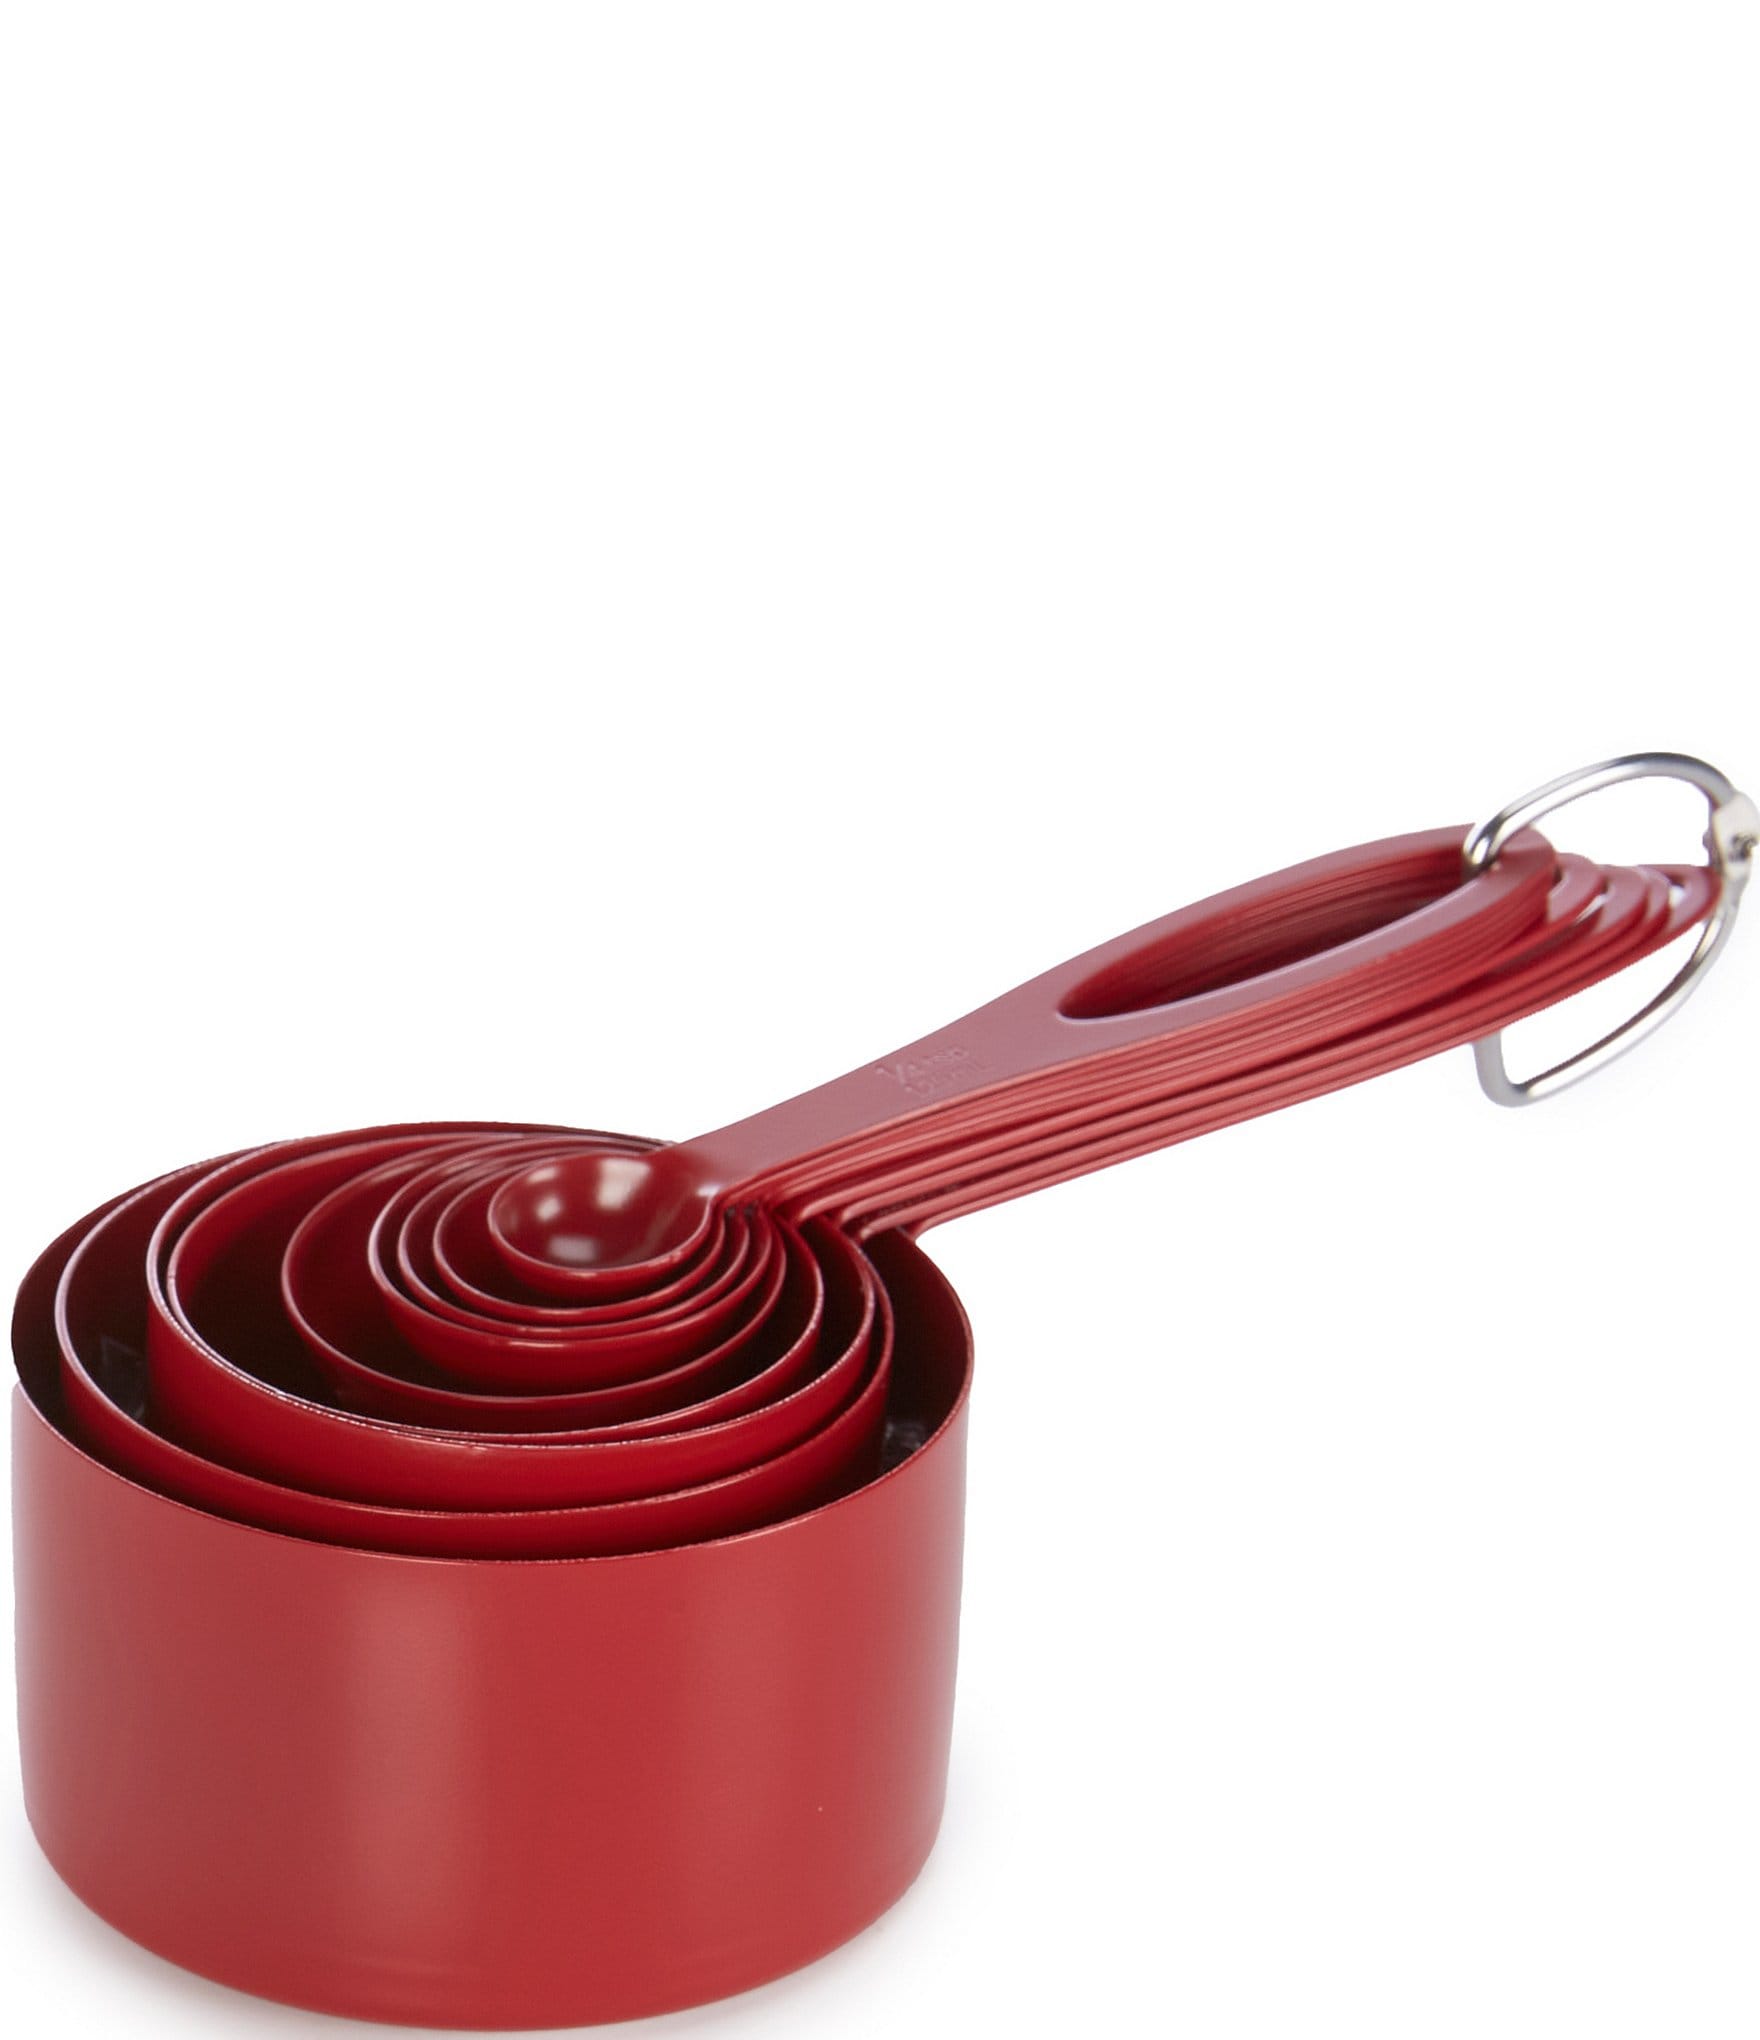 https://dimg.dillards.com/is/image/DillardsZoom/zoom/southern-living-red-measuring-cups-and-spoons-set-of-9/00000000_zi_03ed15f6-7ee7-42cc-833d-e586ef5aa3d5.jpg